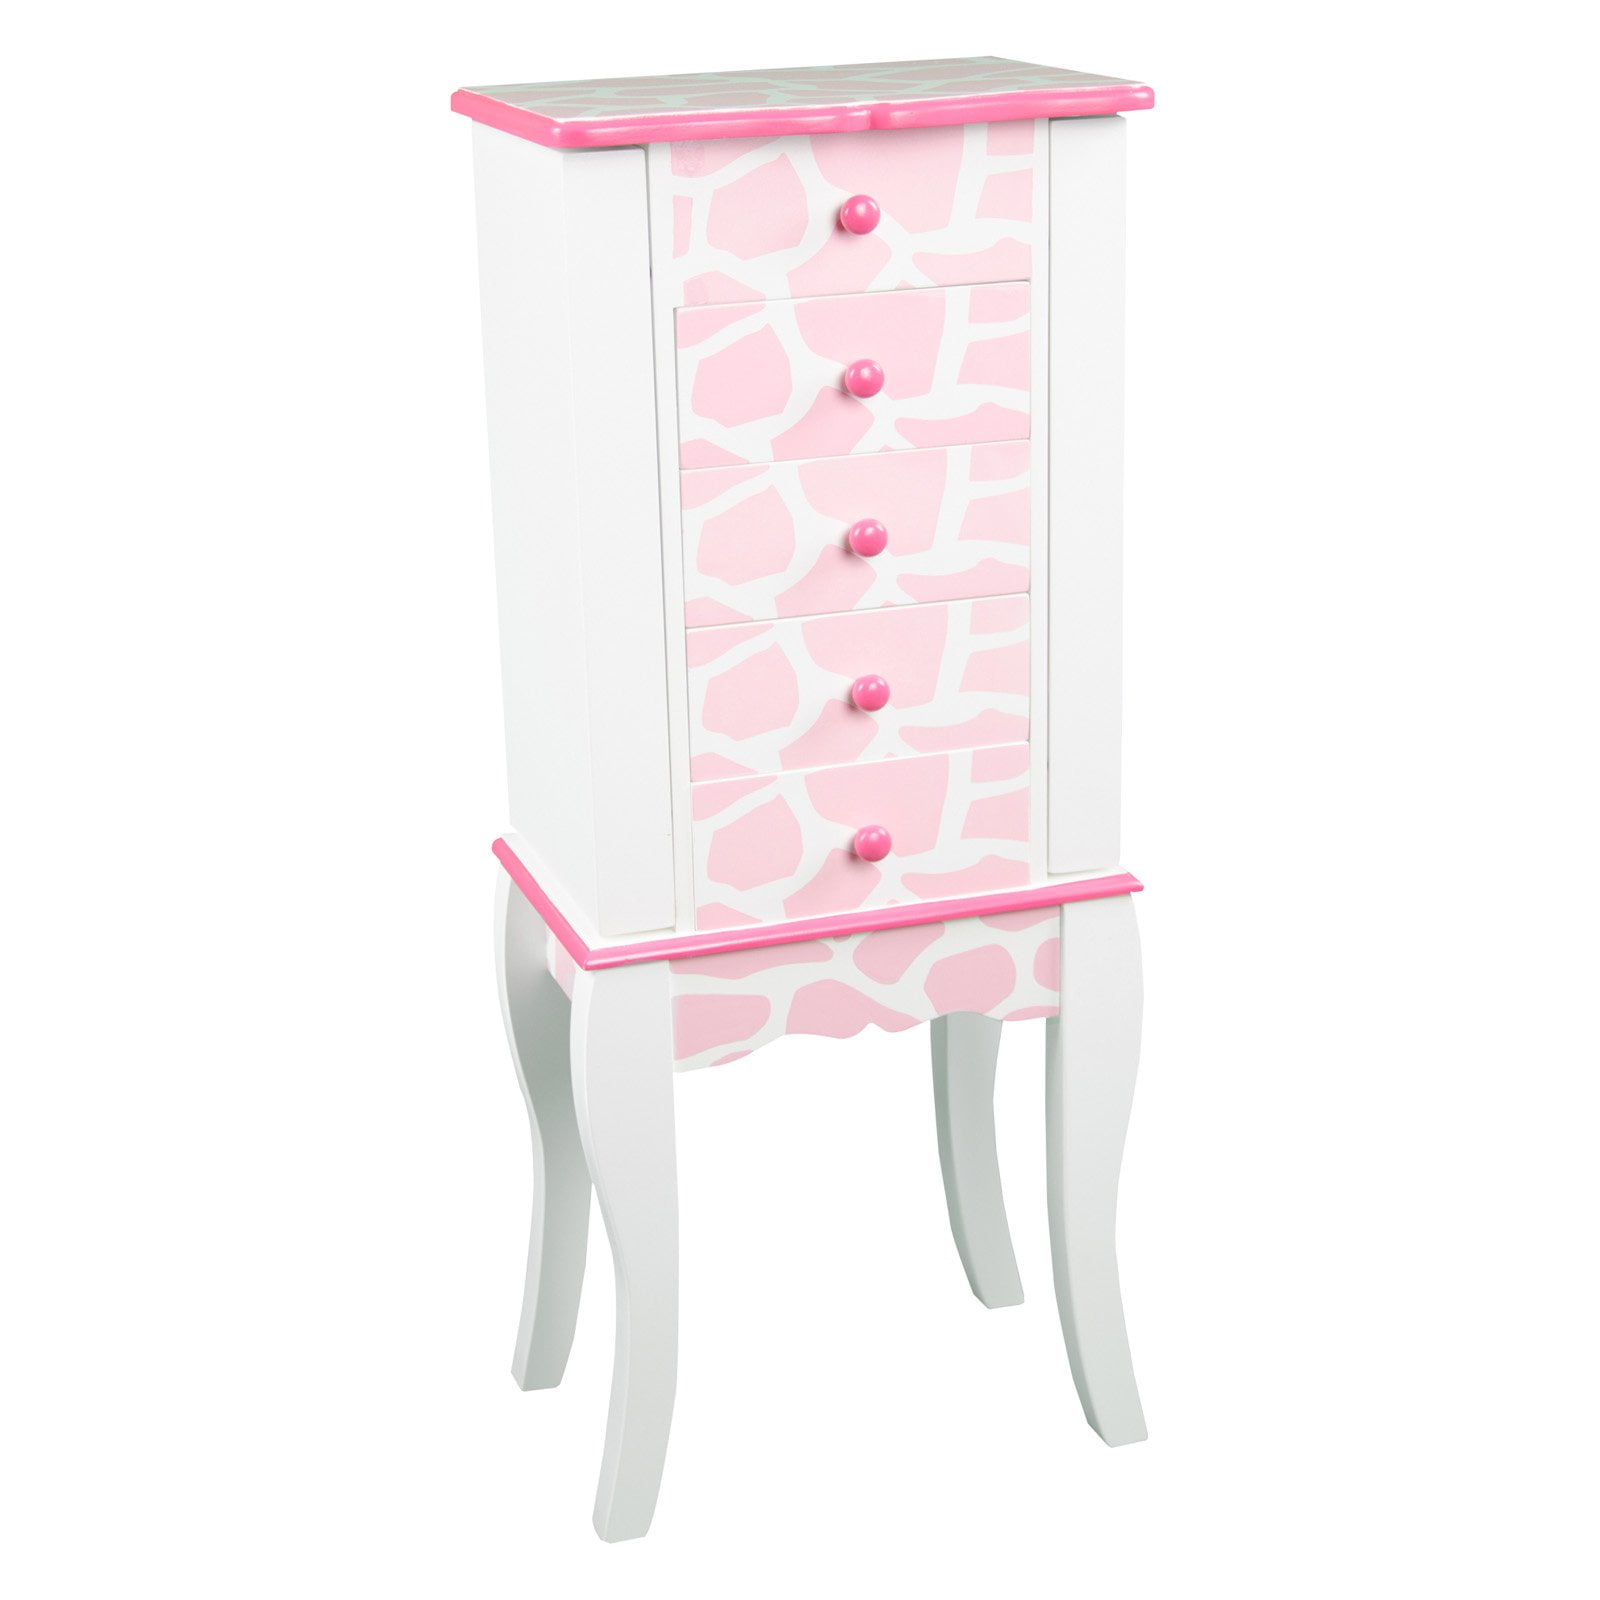 Baby Pink / White Teamson Kids Fashion Prints Jewelry Armoire with Mirror 1 piece for Kids Giraffe 